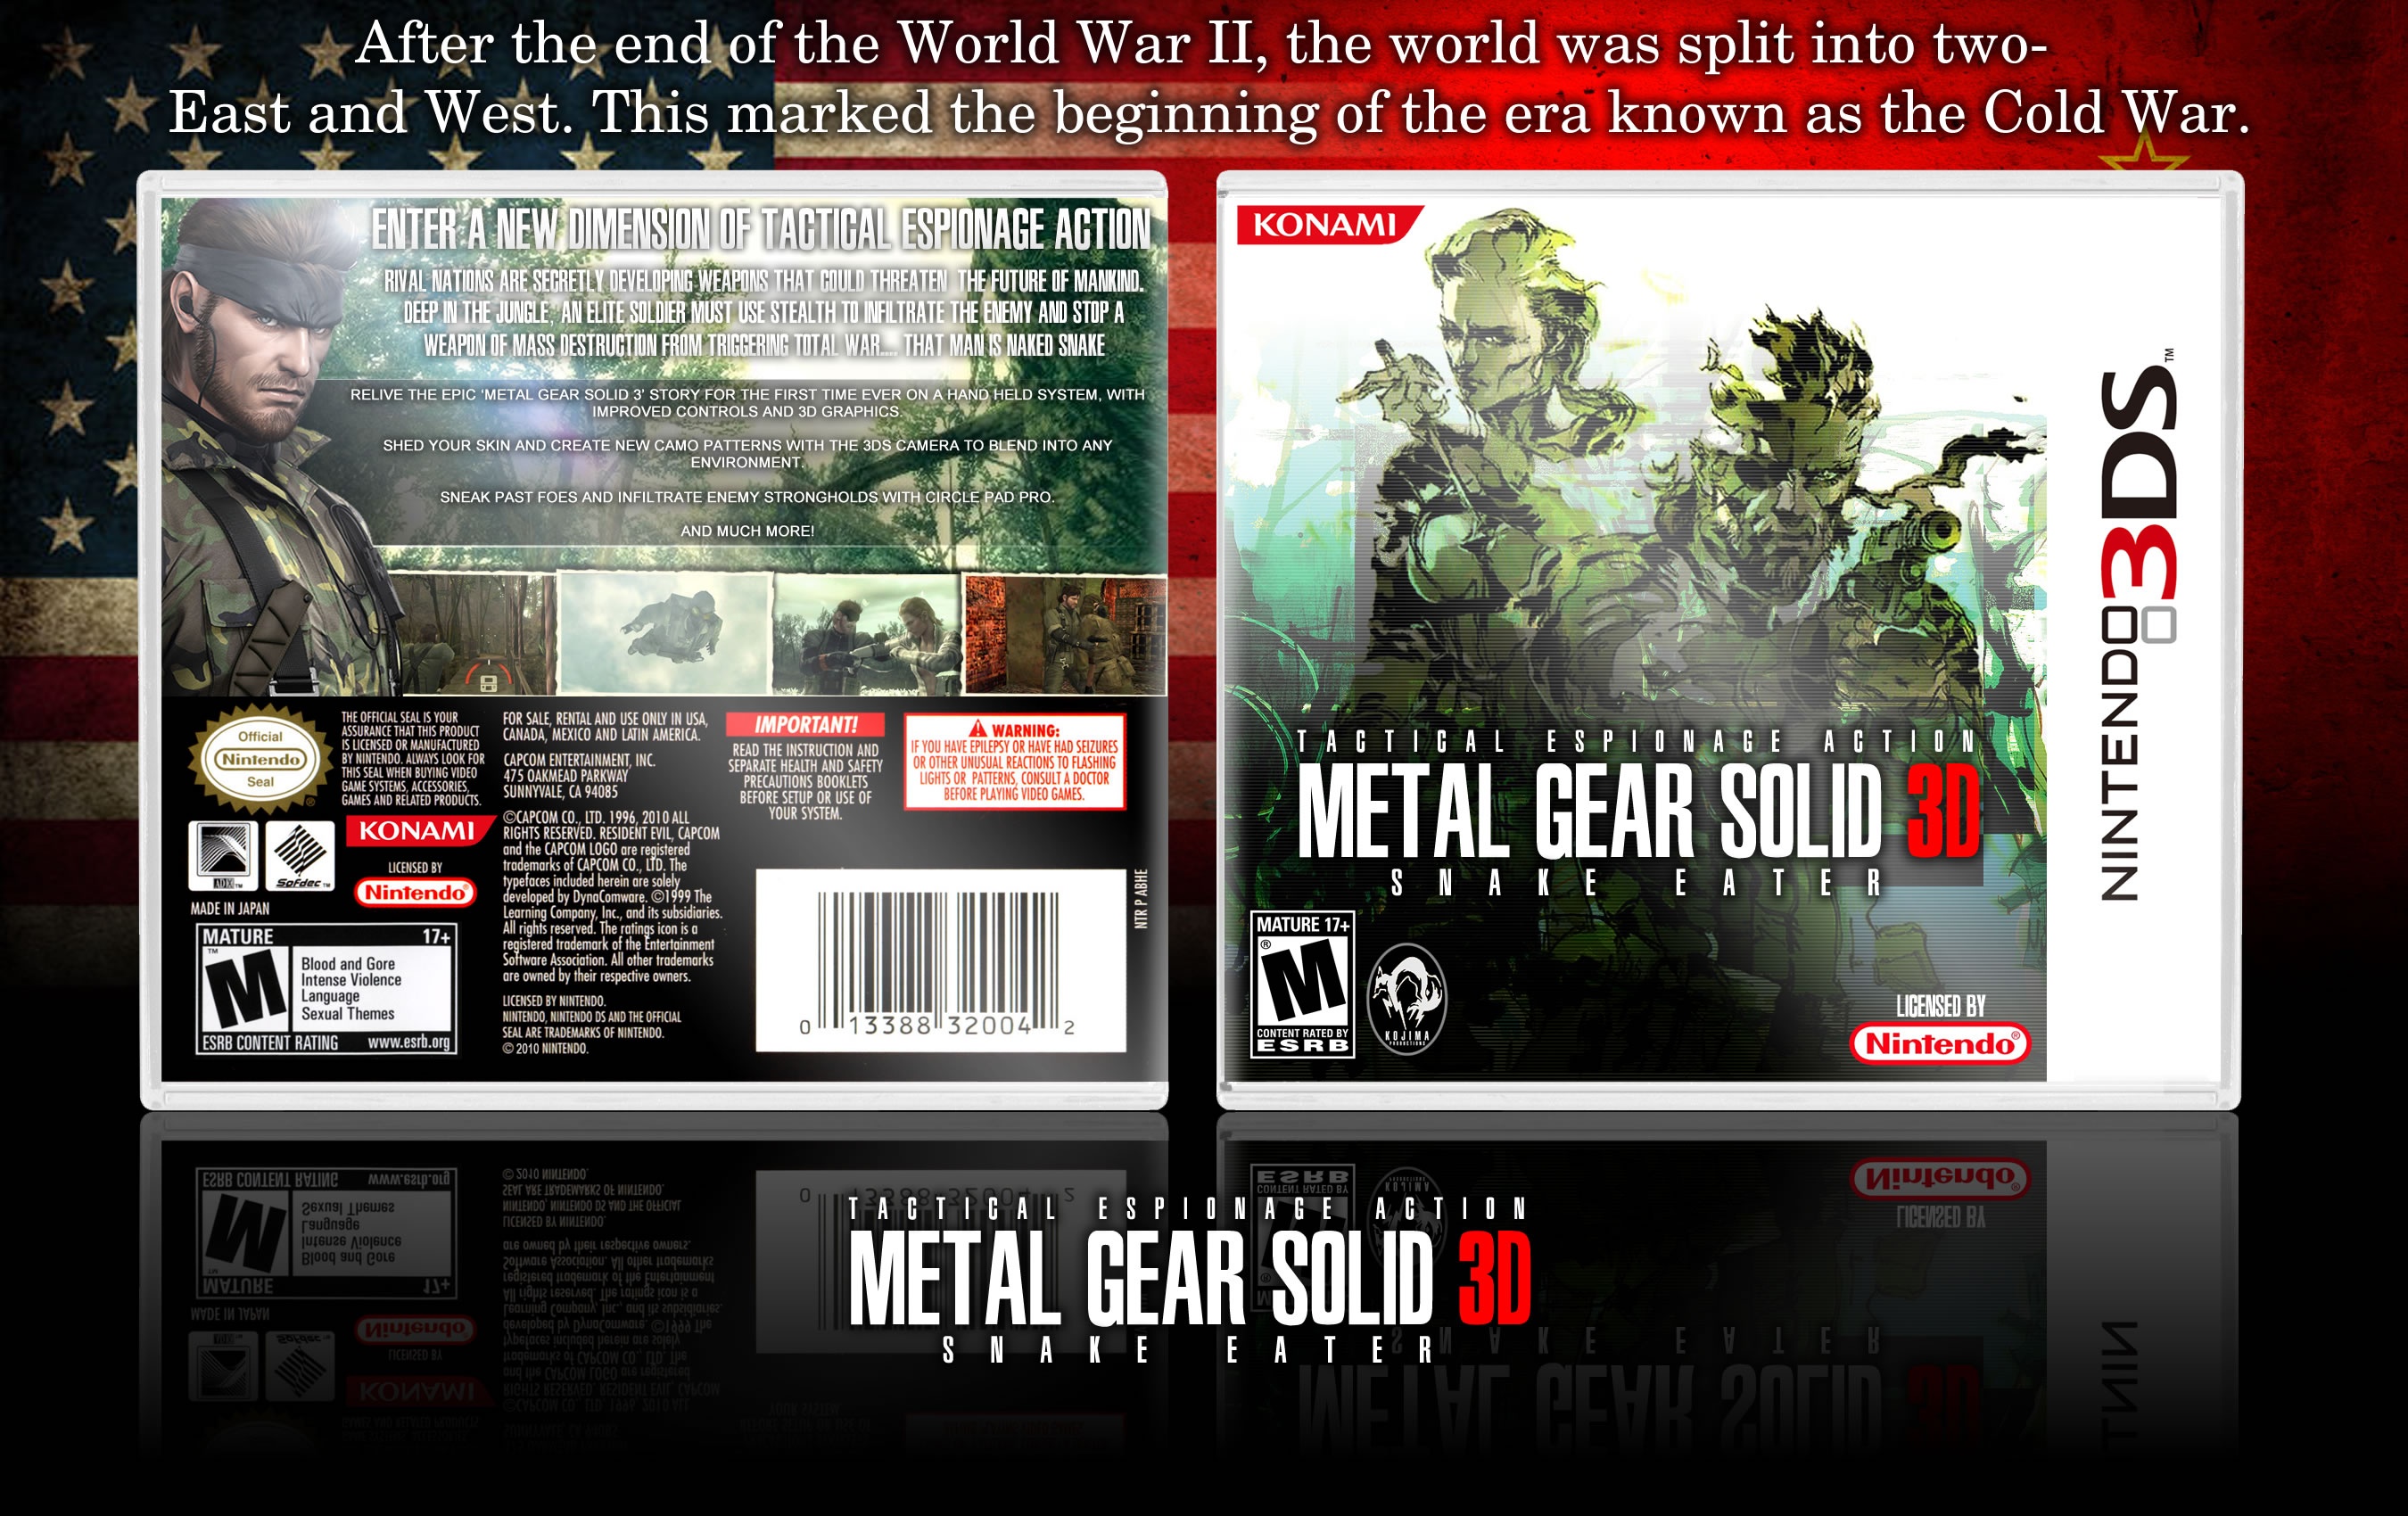 Metal Gear Solid 3D: Snake Eater box cover